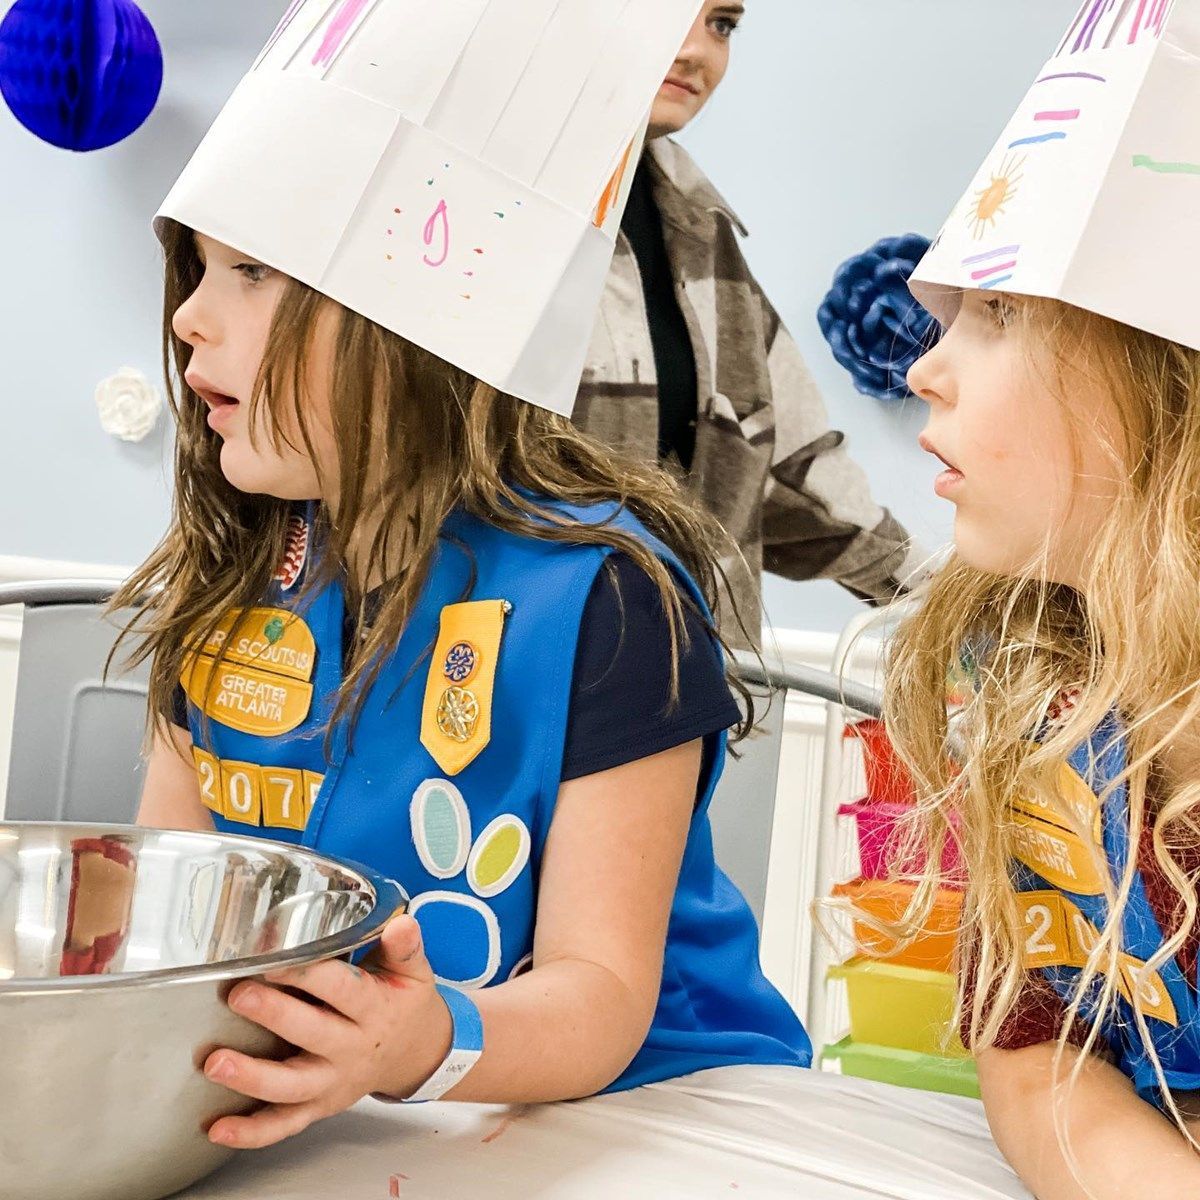 two girl scouts wearing paper hats are looking at a bowl